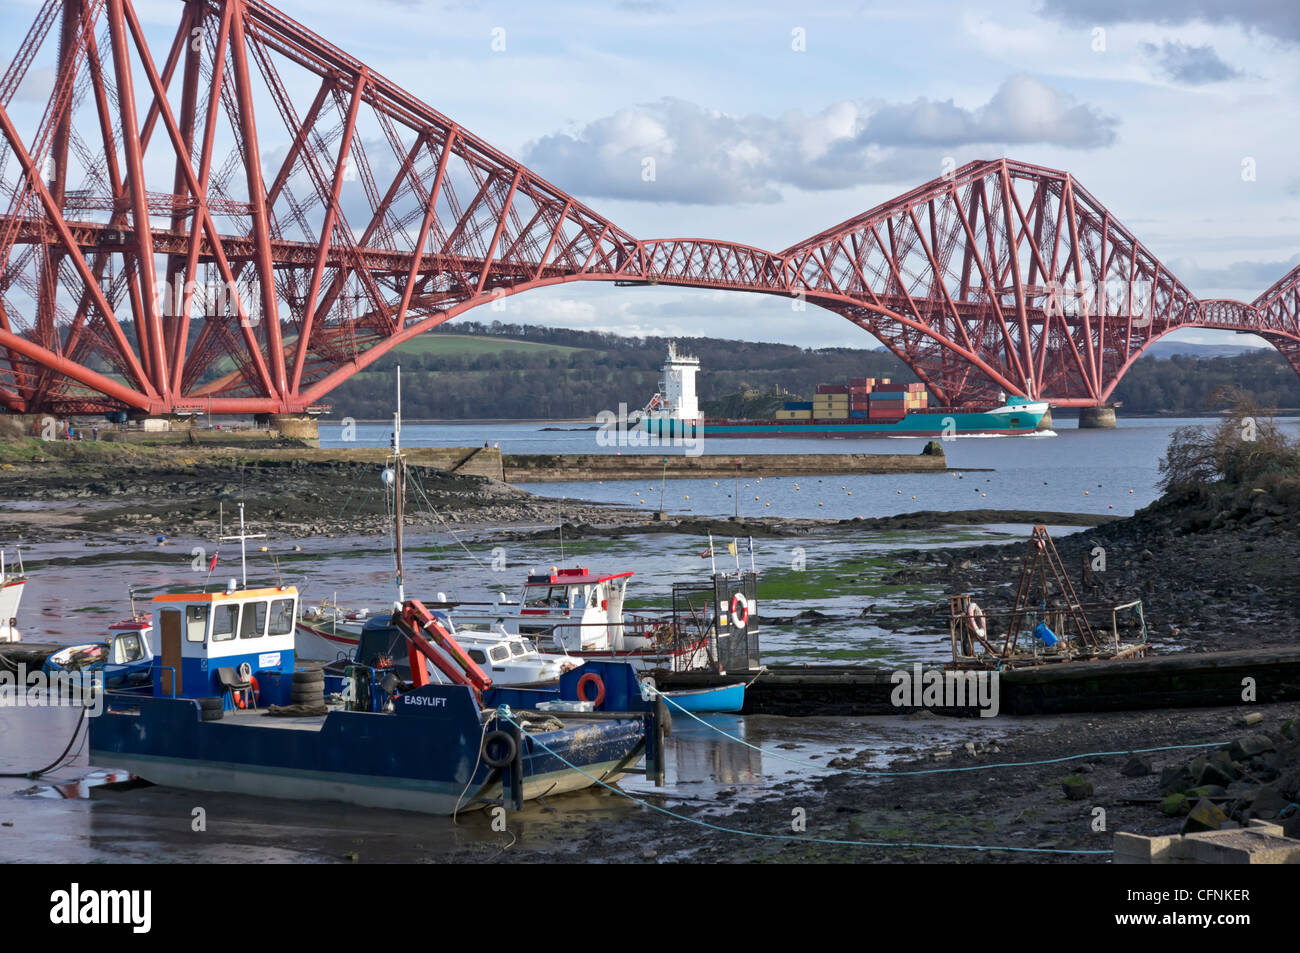 The famous Forth Rail Bridge linking North Queensferry with Queensferry to the south as seen from the North Queensferry side. Stock Photo